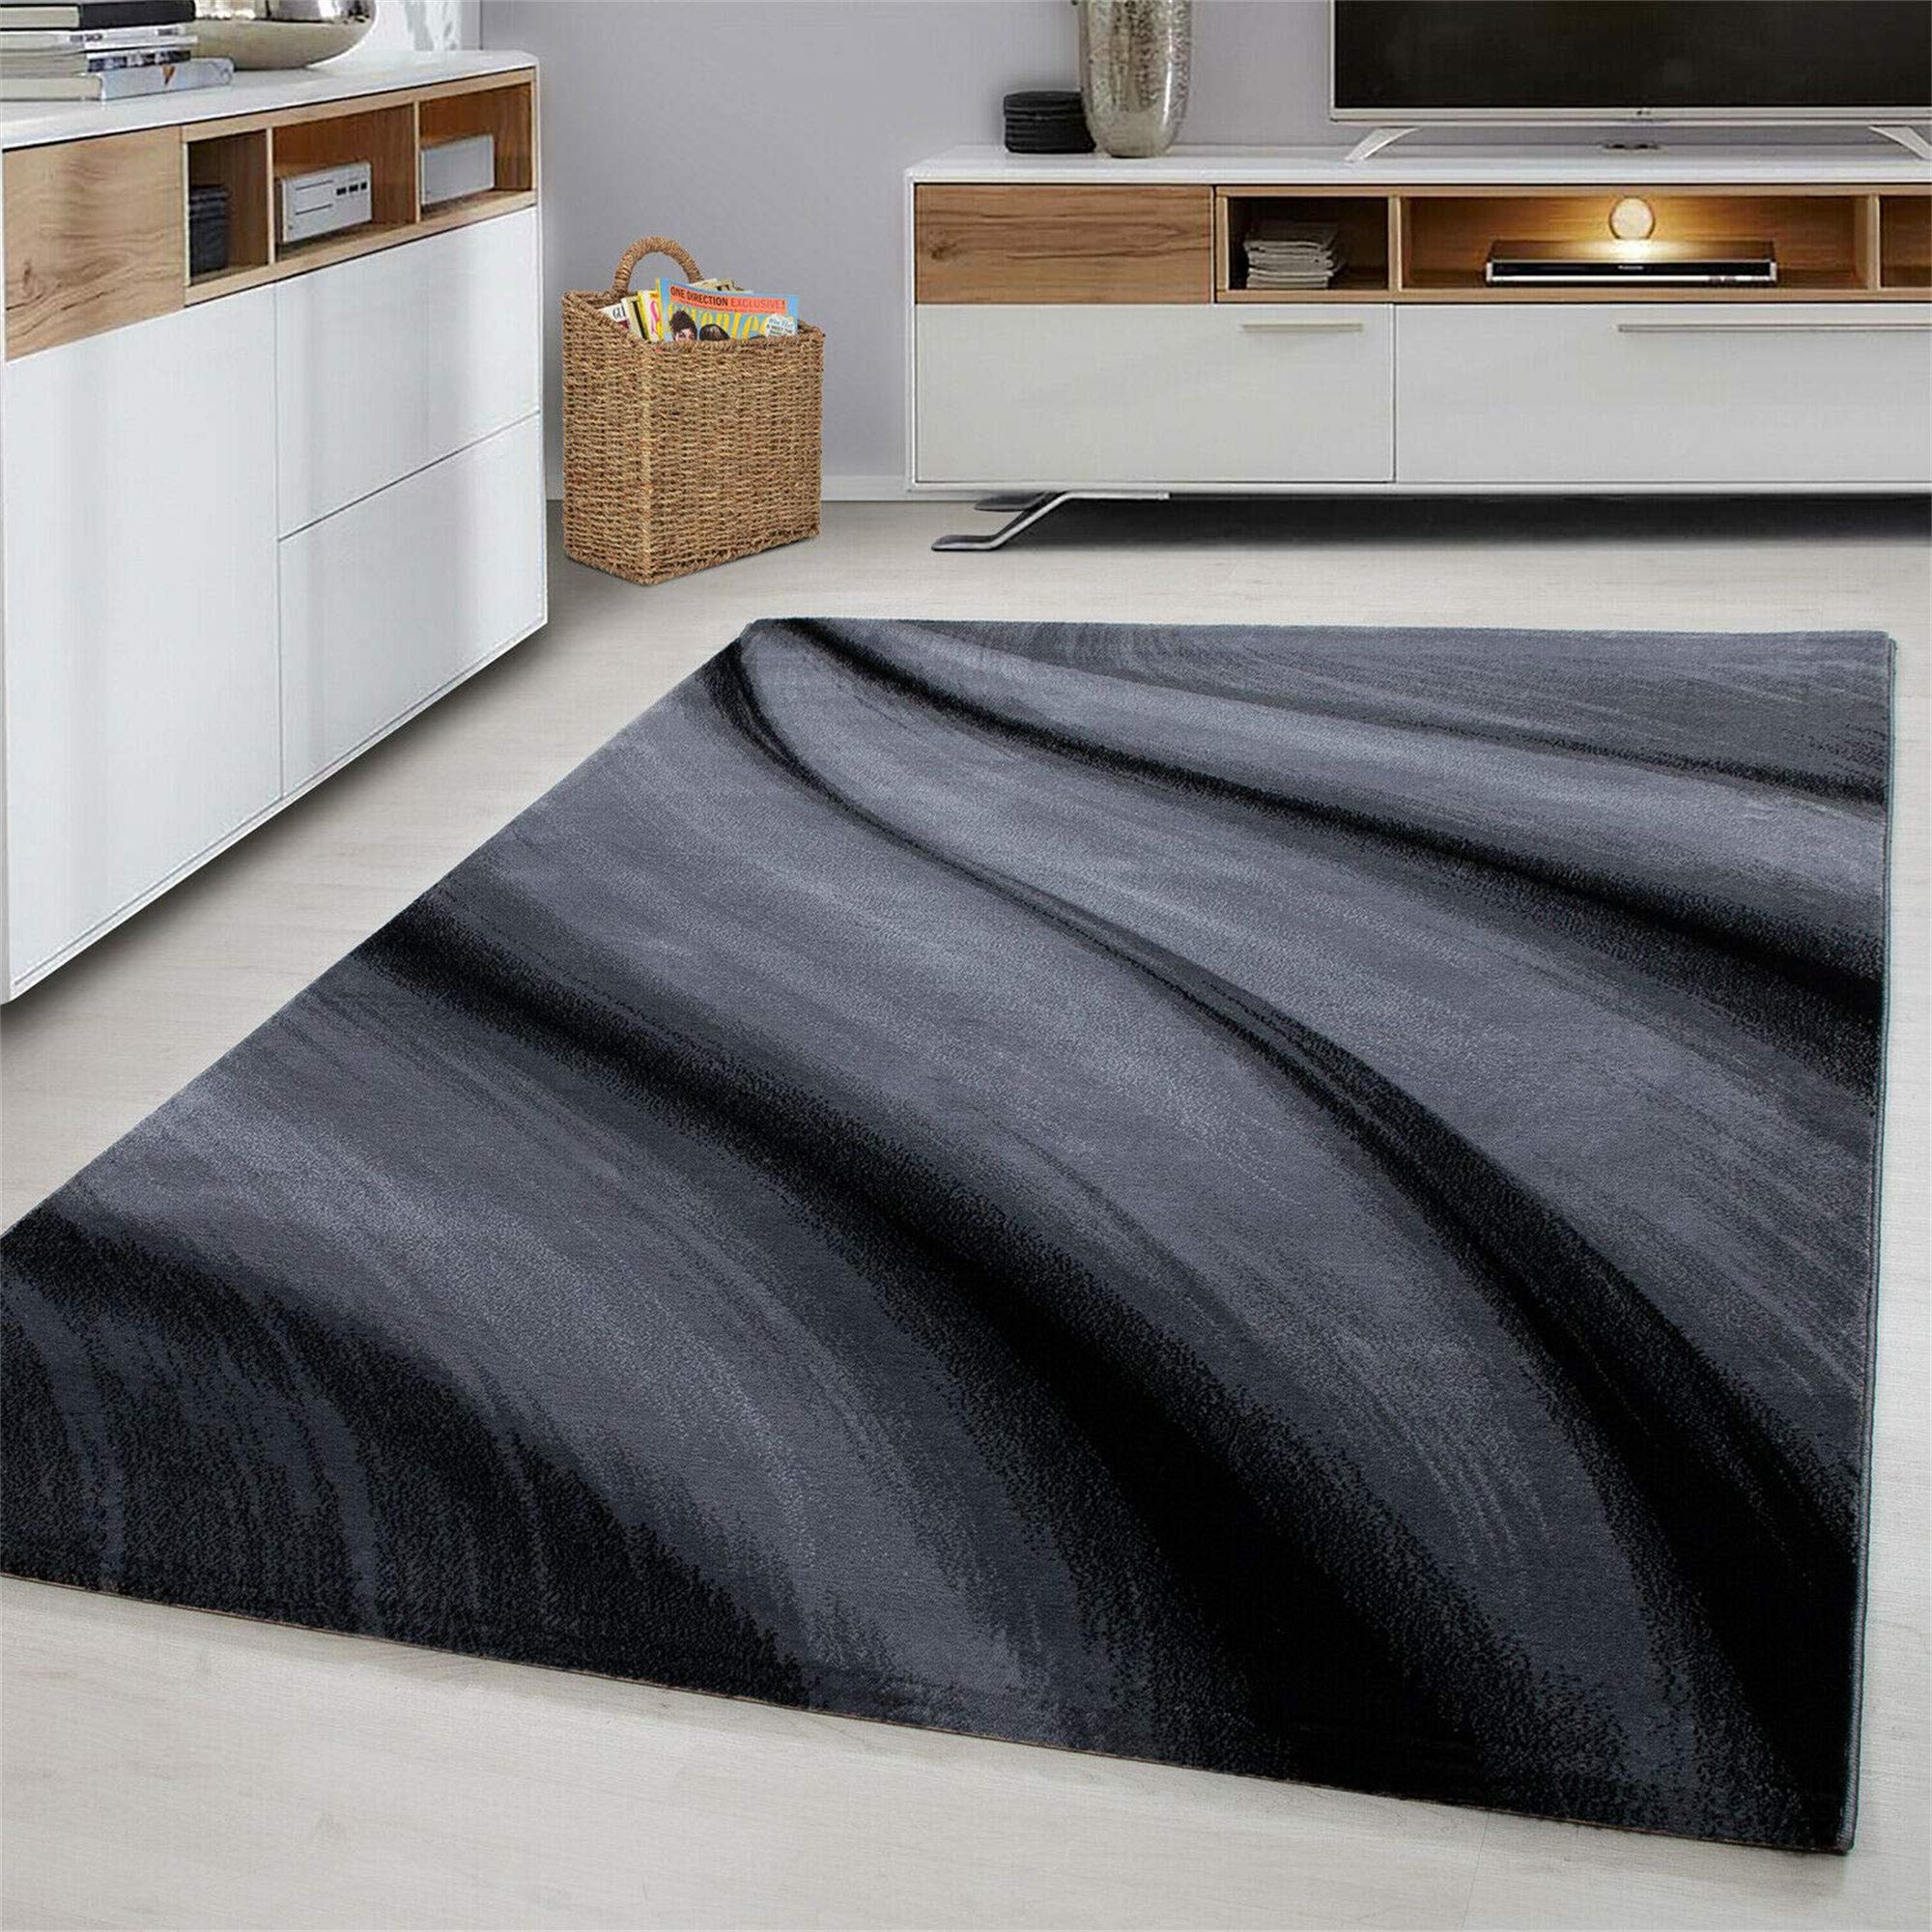 Ivy Bronx Modern Design Black Grey Charcoal Rugs Living Room Extra Large  Size Soft Touch Short Pile Style Carpet Area Rugs Non Shedding (160Cm X  220Cm (5.5Ft X 7.2Ft)) | Wayfair.co (View 11 of 15)